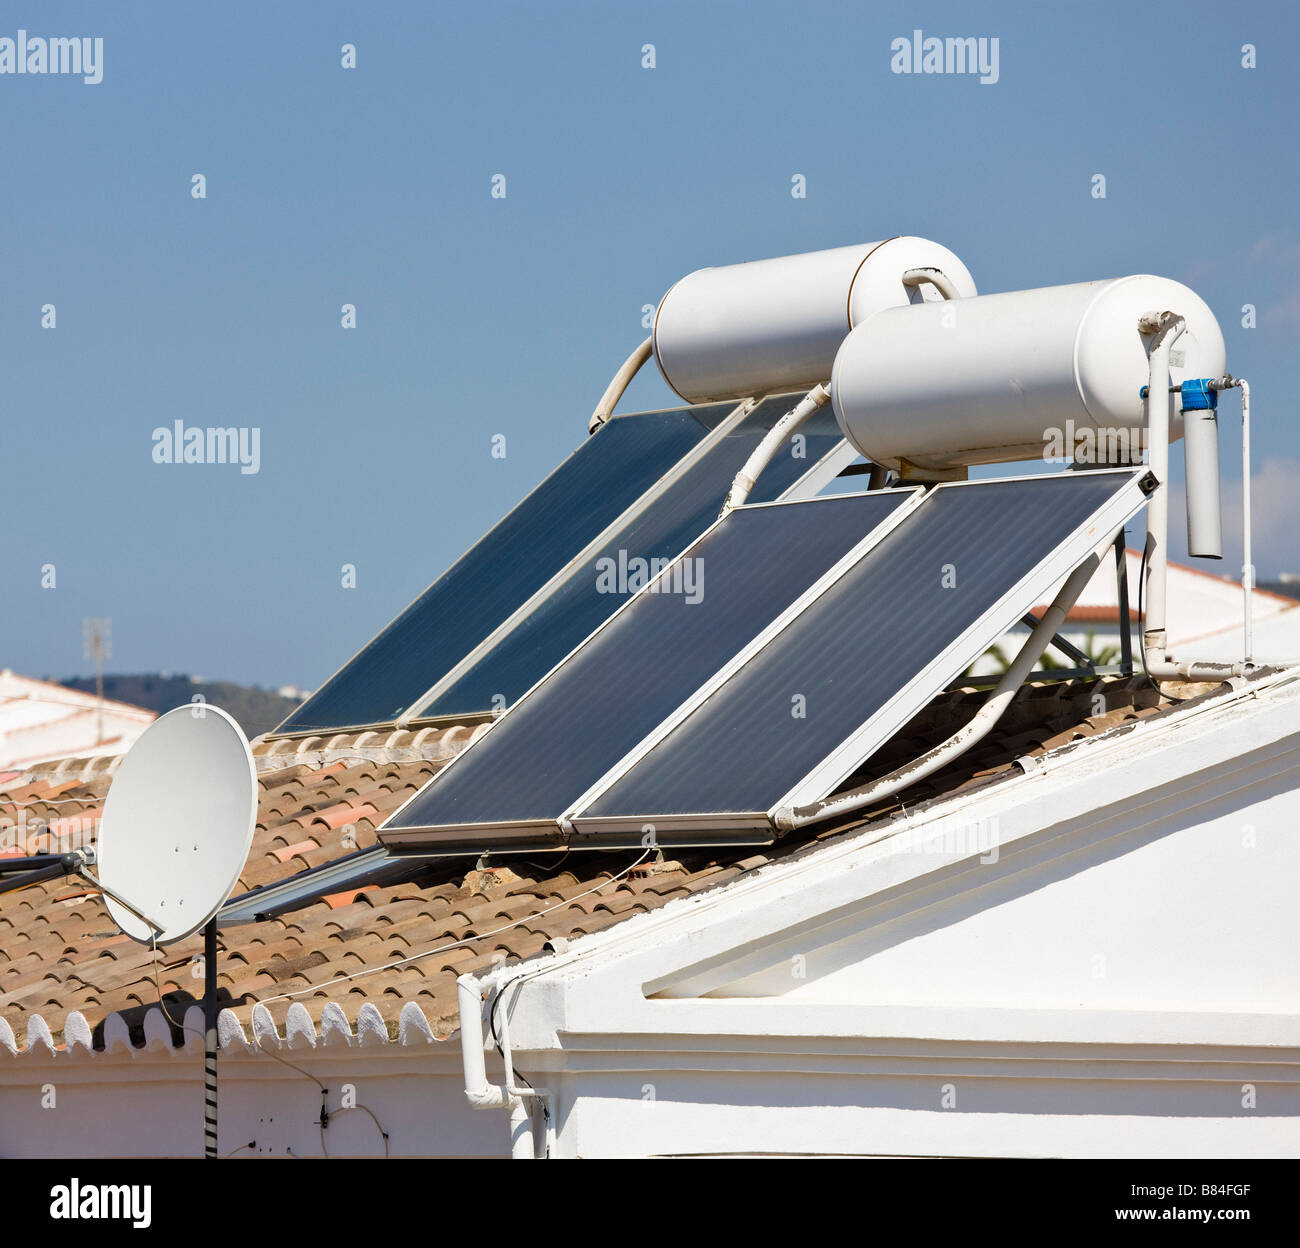 Pannelli fotovoltaici, Nerja, Andalusia, Spagna Foto Stock